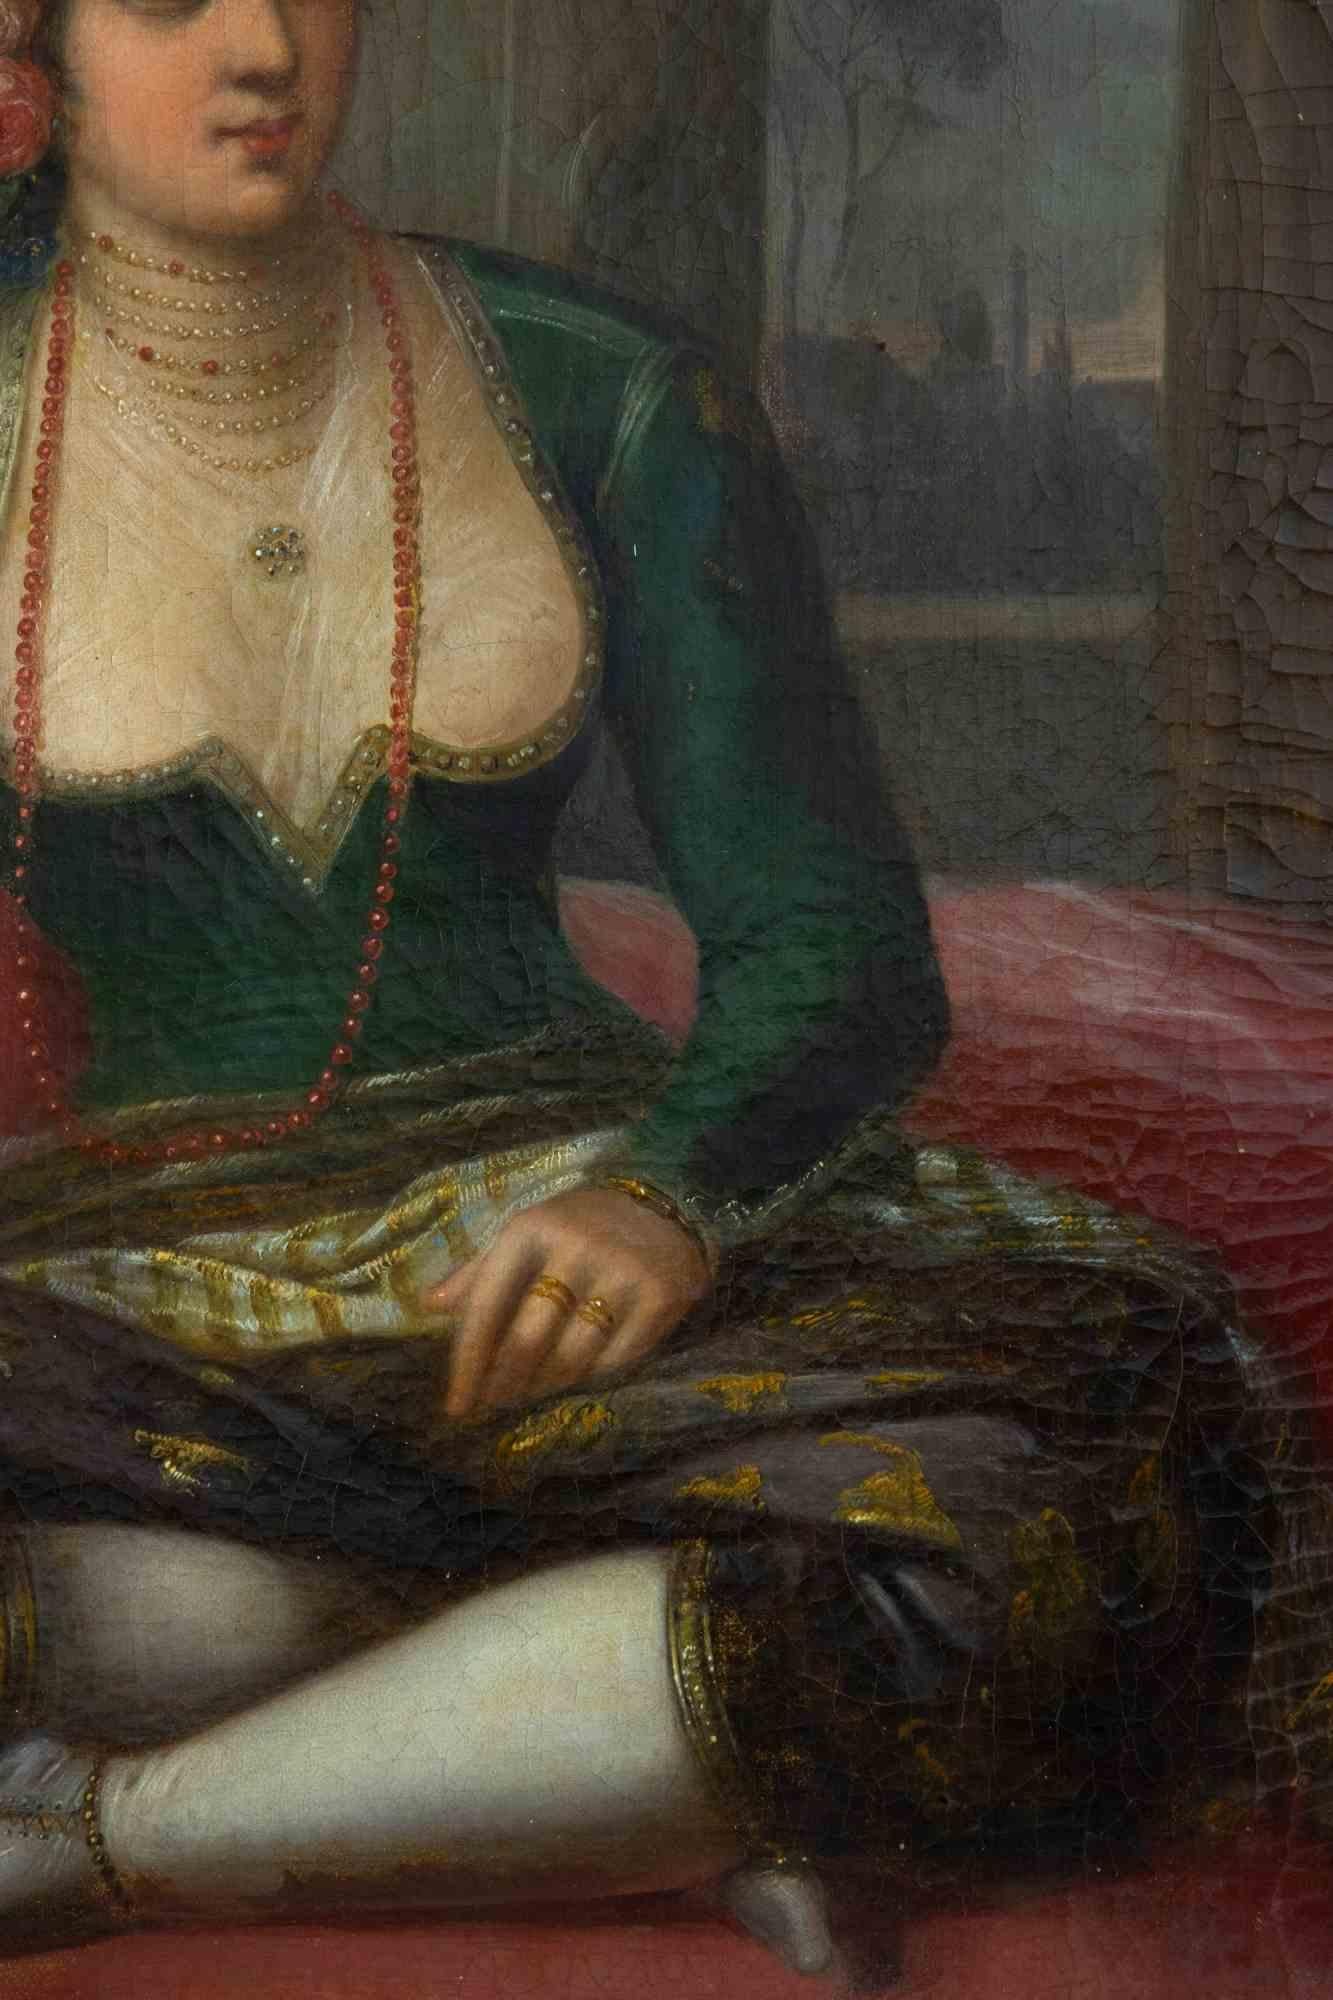 Lady in the Harem - Oil on Canvas - 19th Century - Painting by Unknown